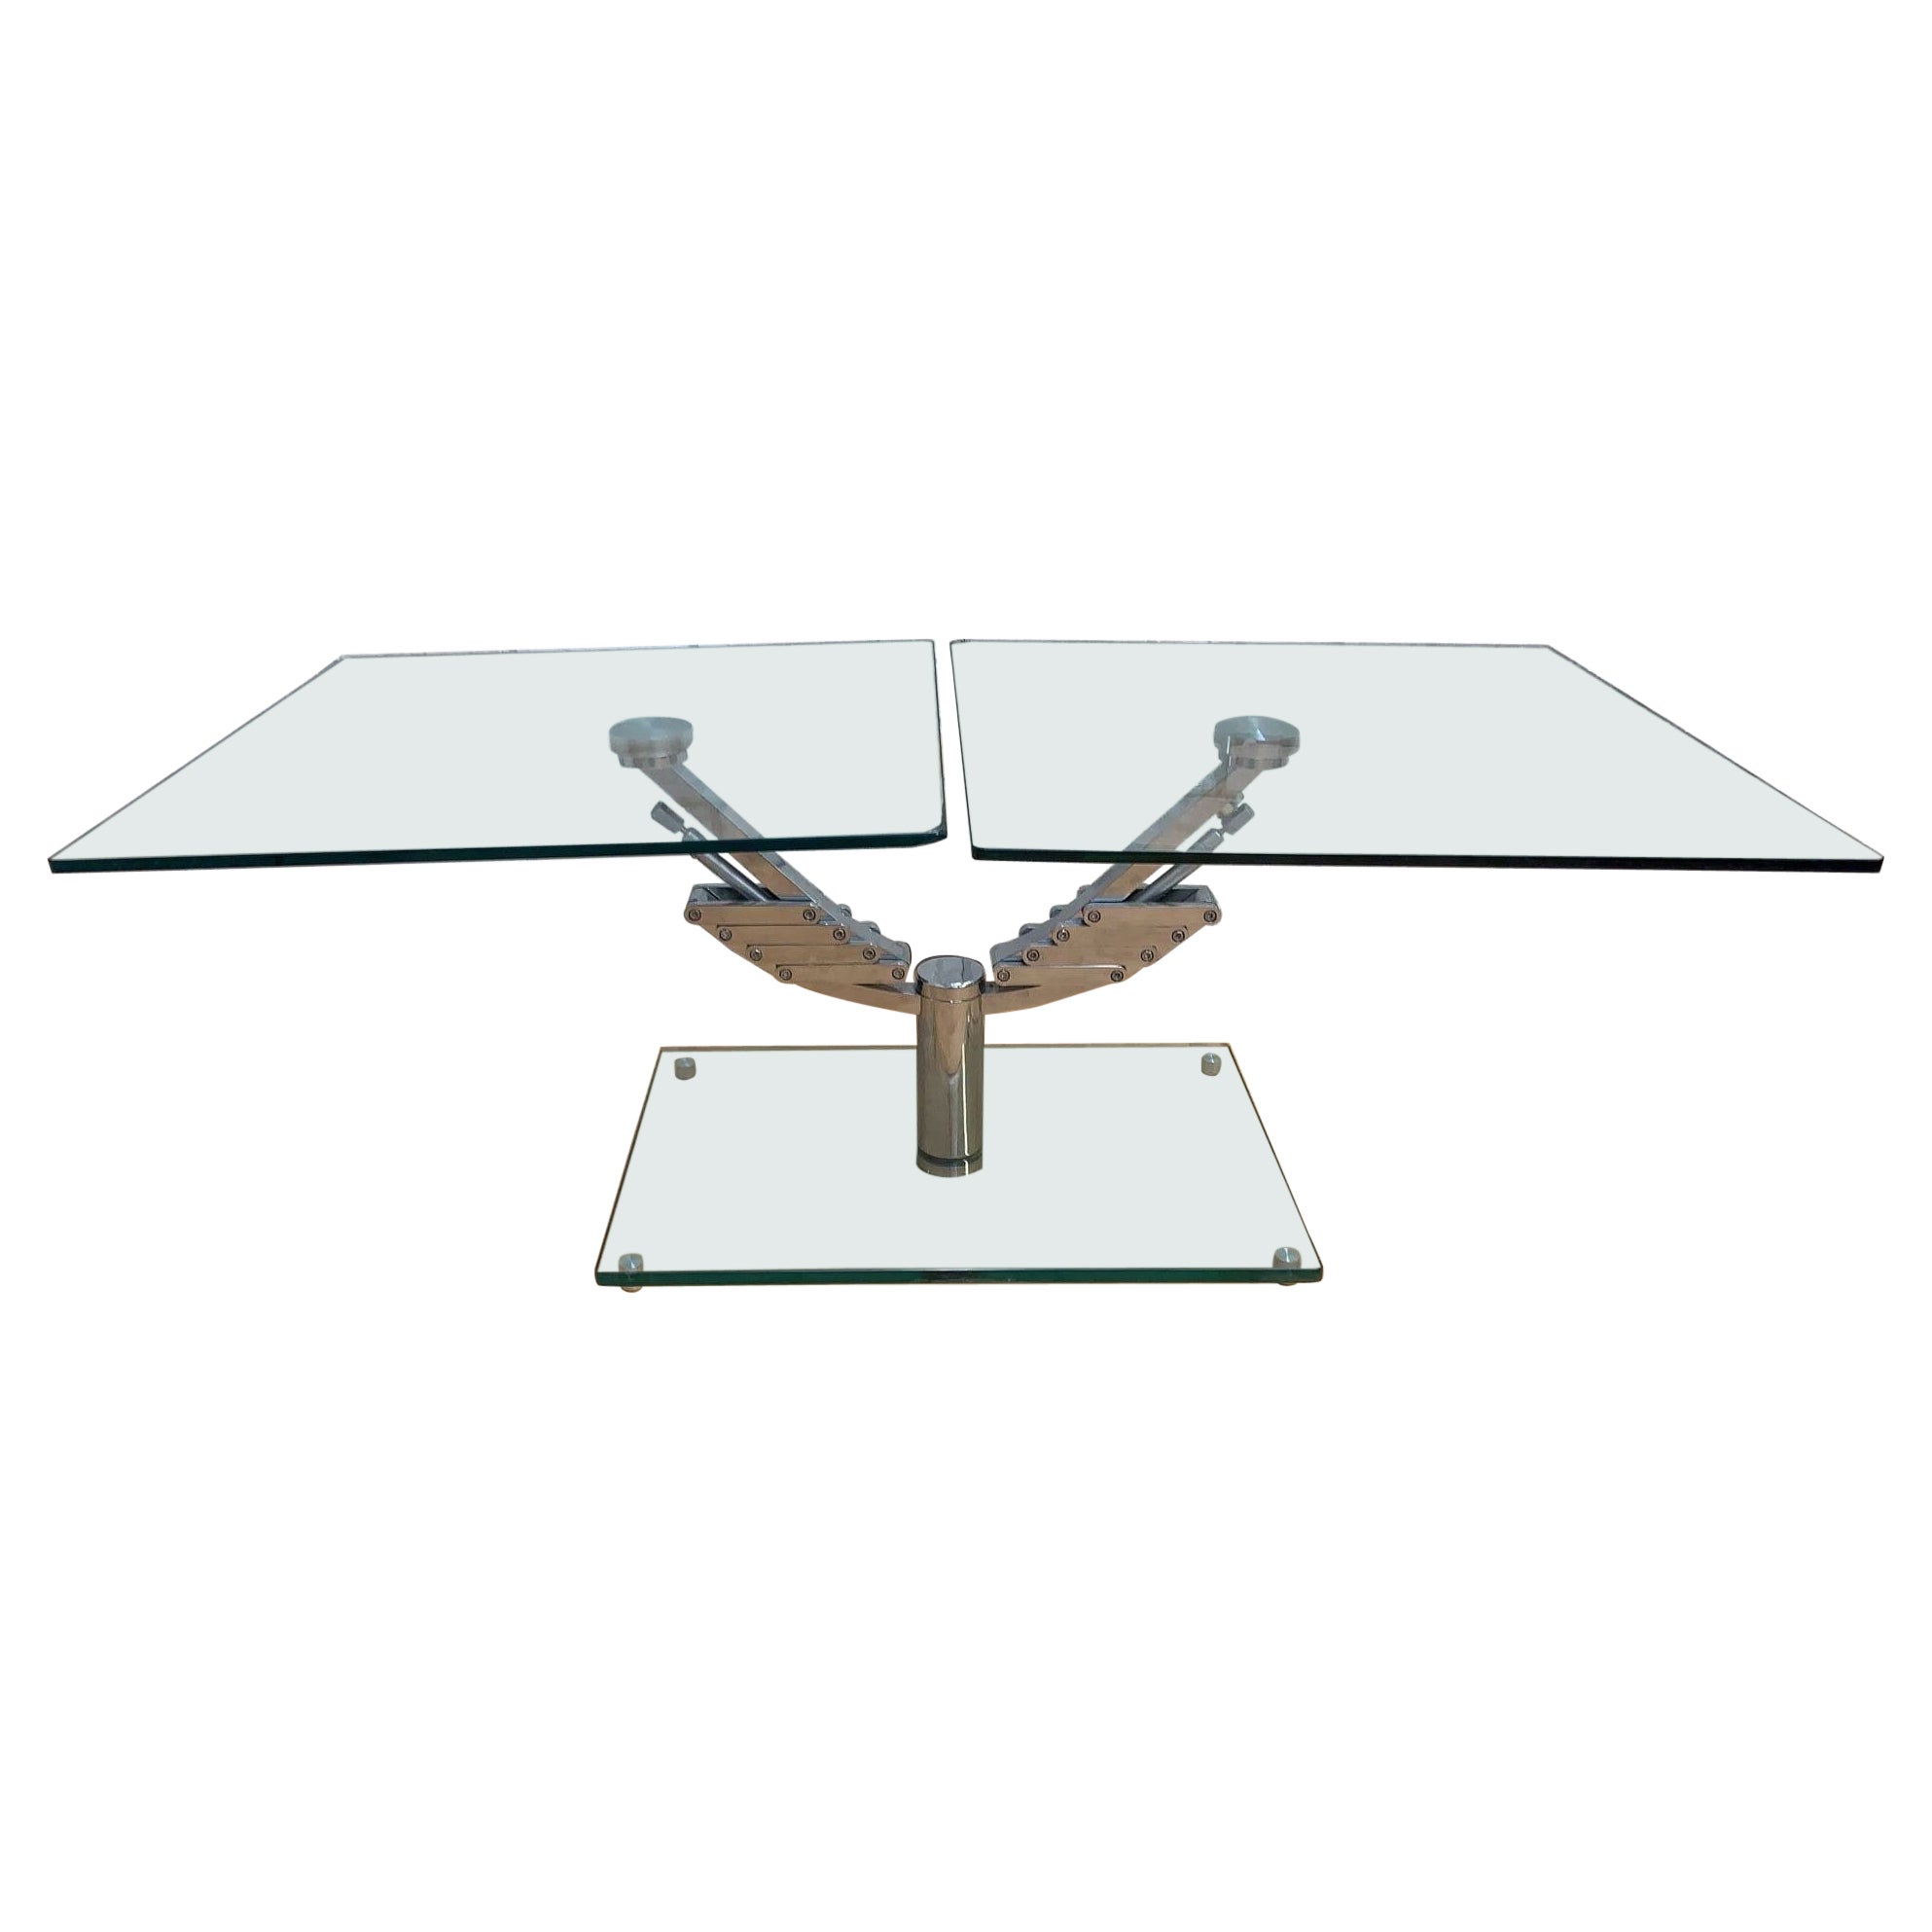 Vintage Italian Mod Glass Top Extending 2 Arm Cocktail Table For Sale